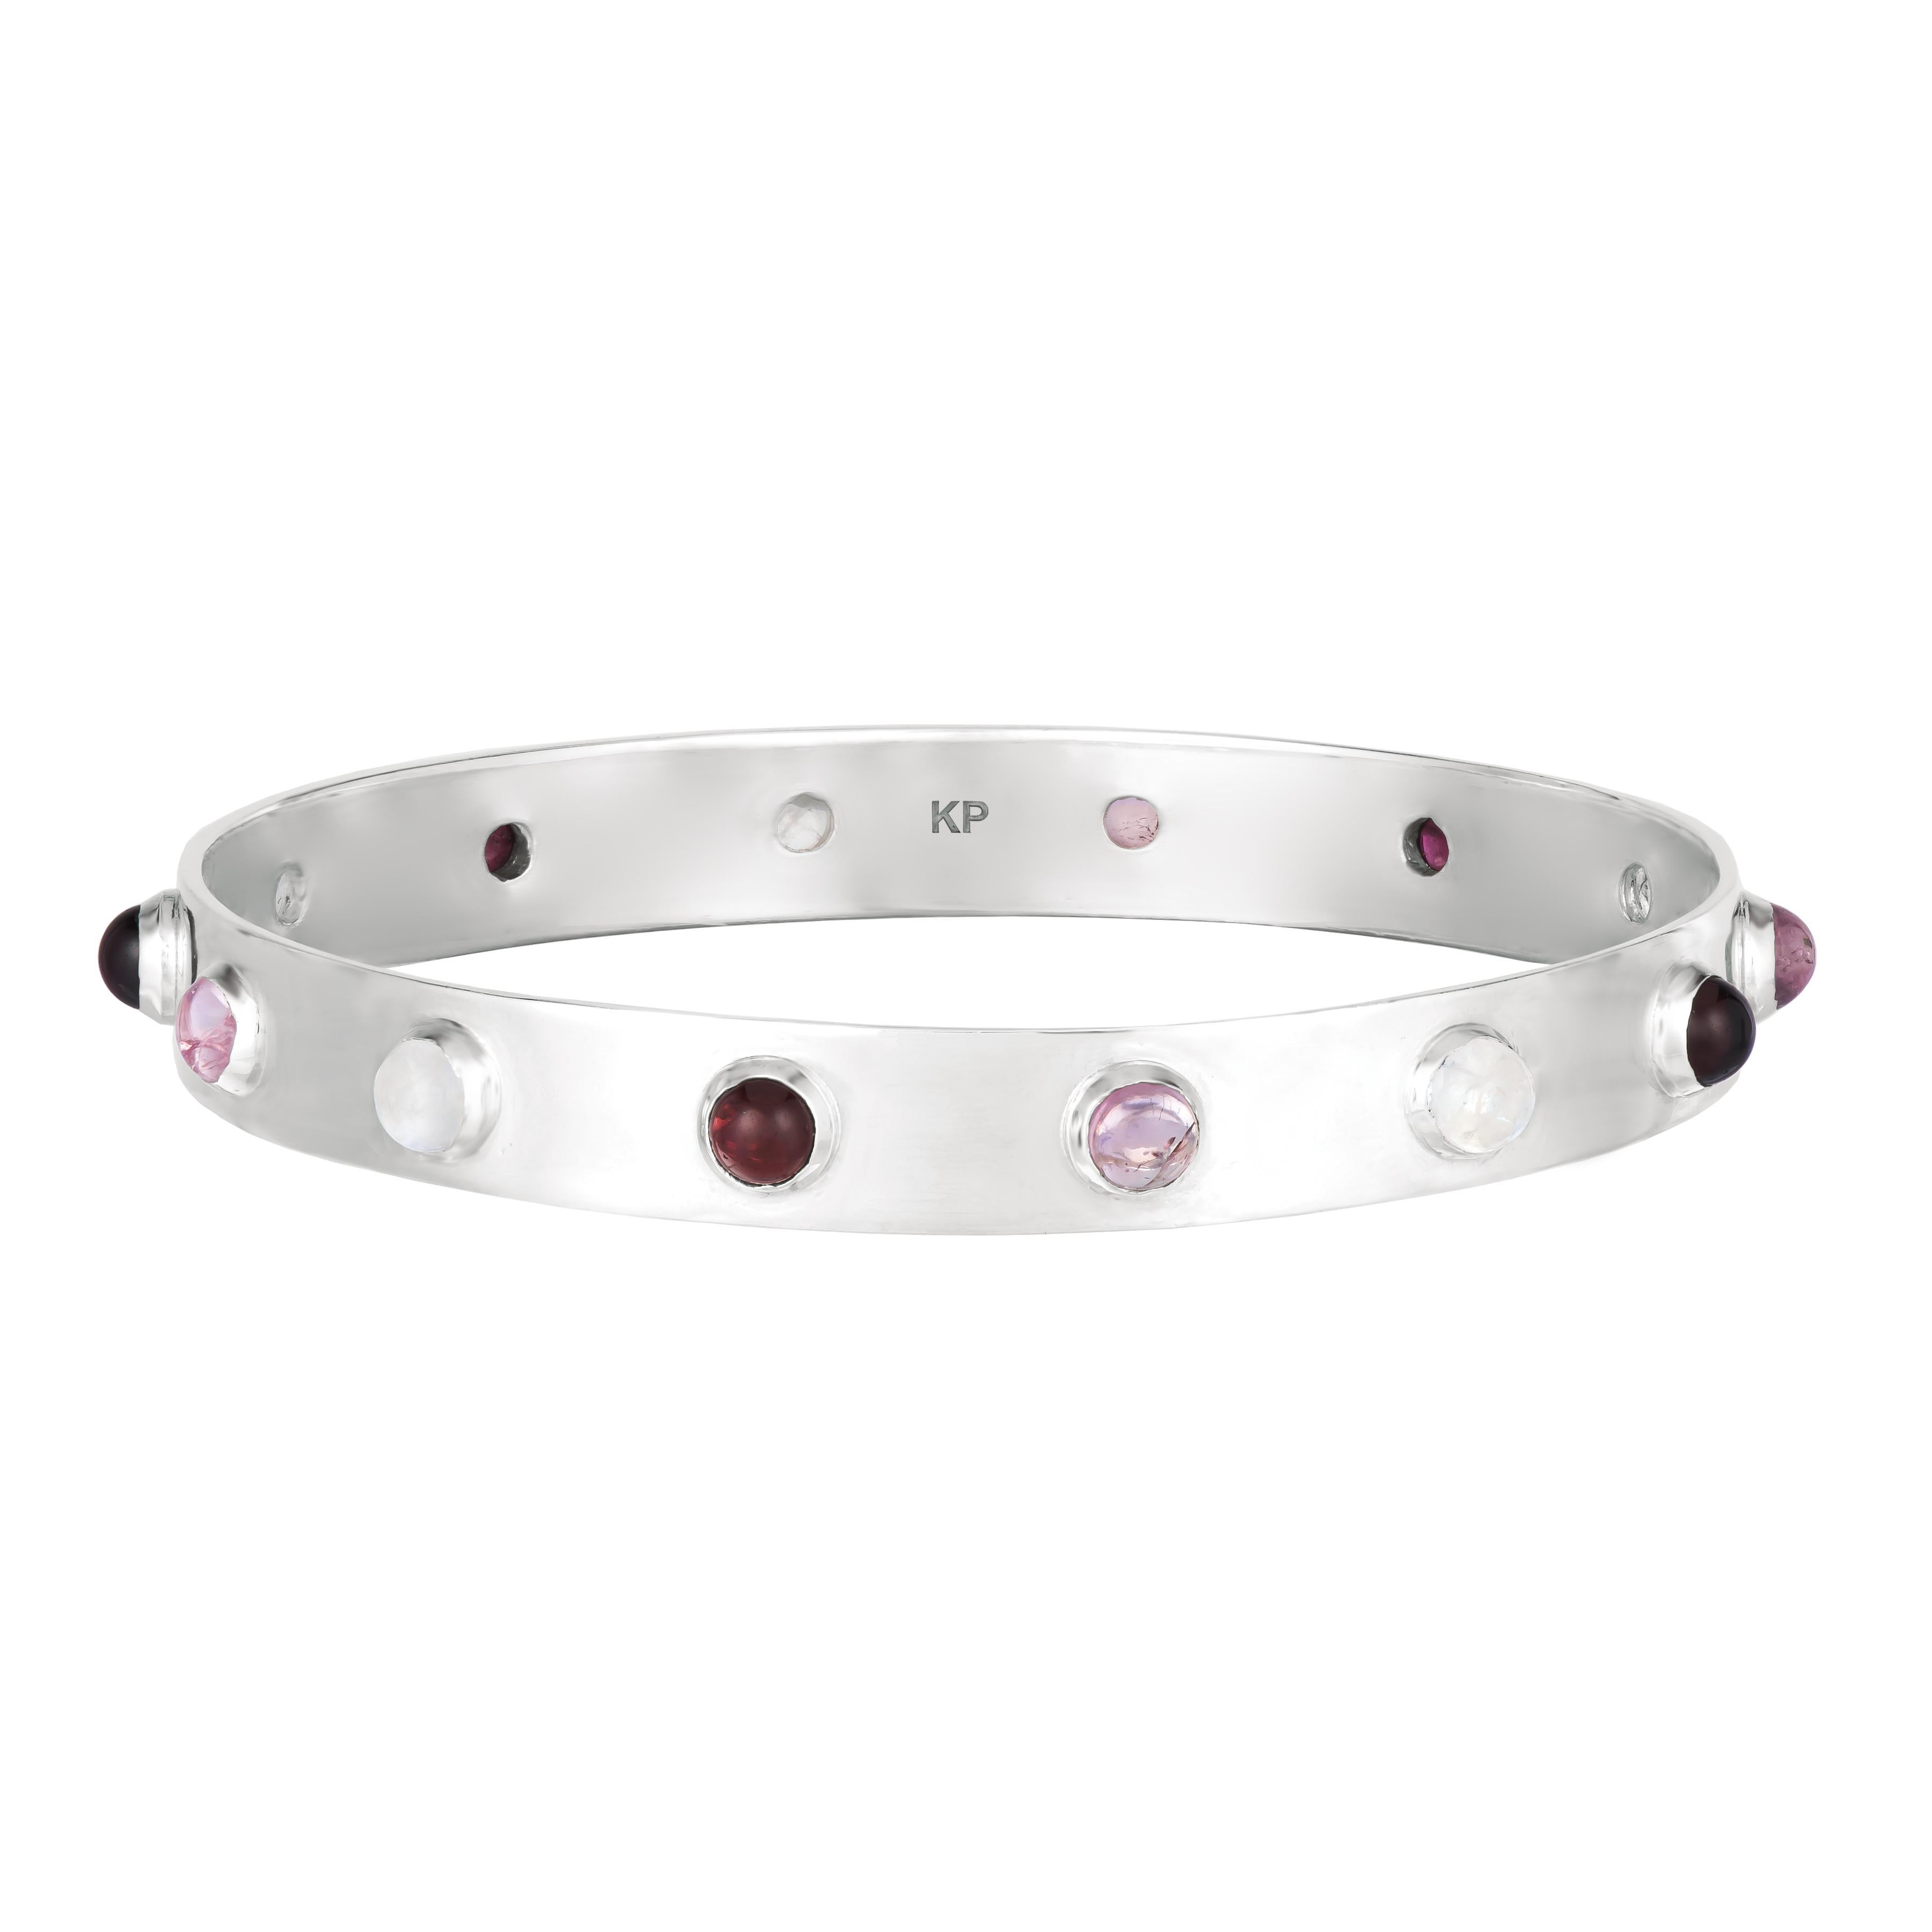 This bangle in 18K gold plate is the ideal accessory to a daytime or evening outfit, thanks to its sleek style, it is easy to slide on and take off. Its all-around stones feature a vivid splash of colors with cabernet red garnet, lemon citrine, rose